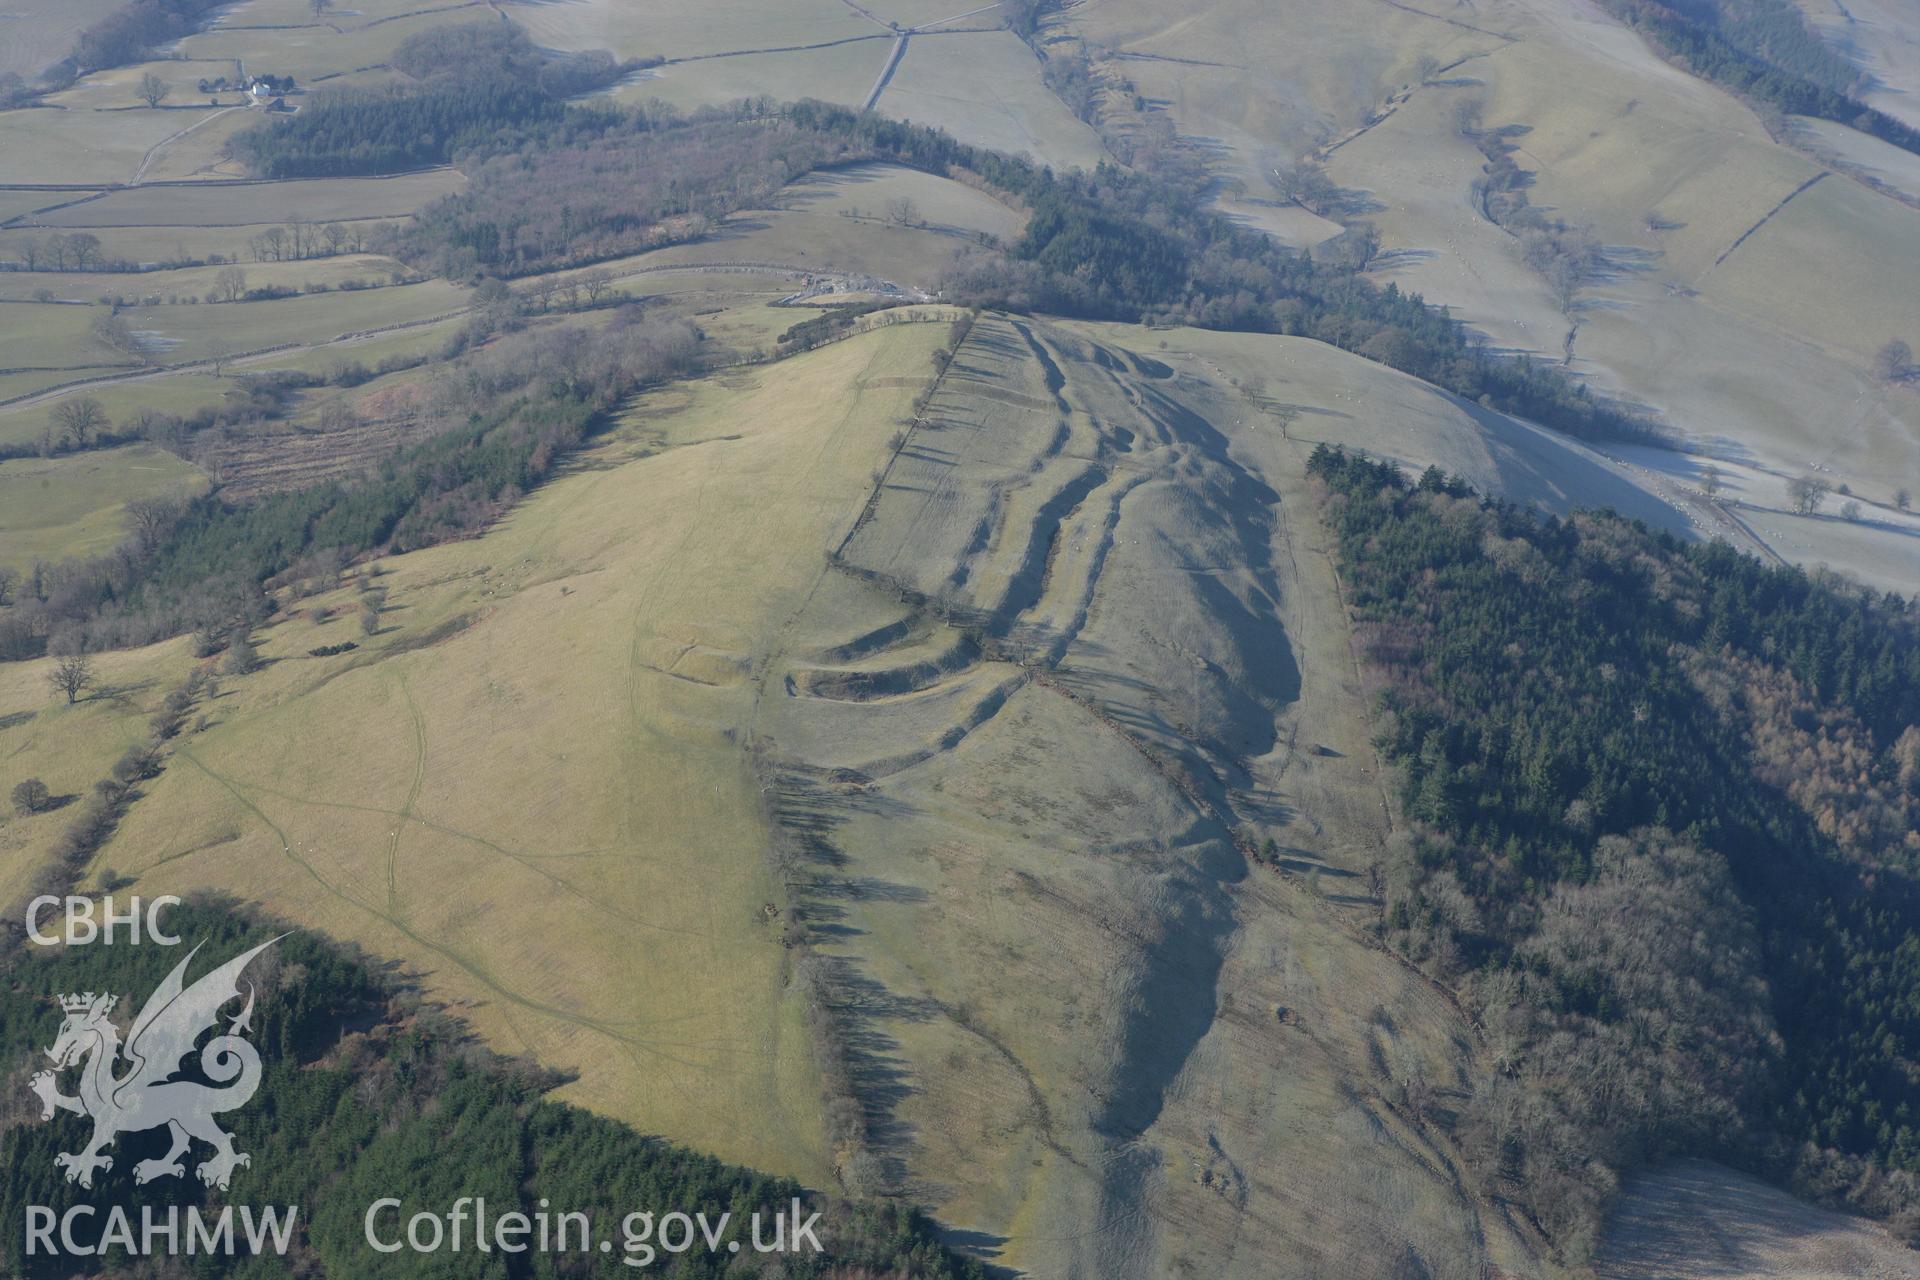 RCAHMW colour oblique photograph of Cefn Carnedd hillfort. Taken by Toby Driver on 08/03/2010.